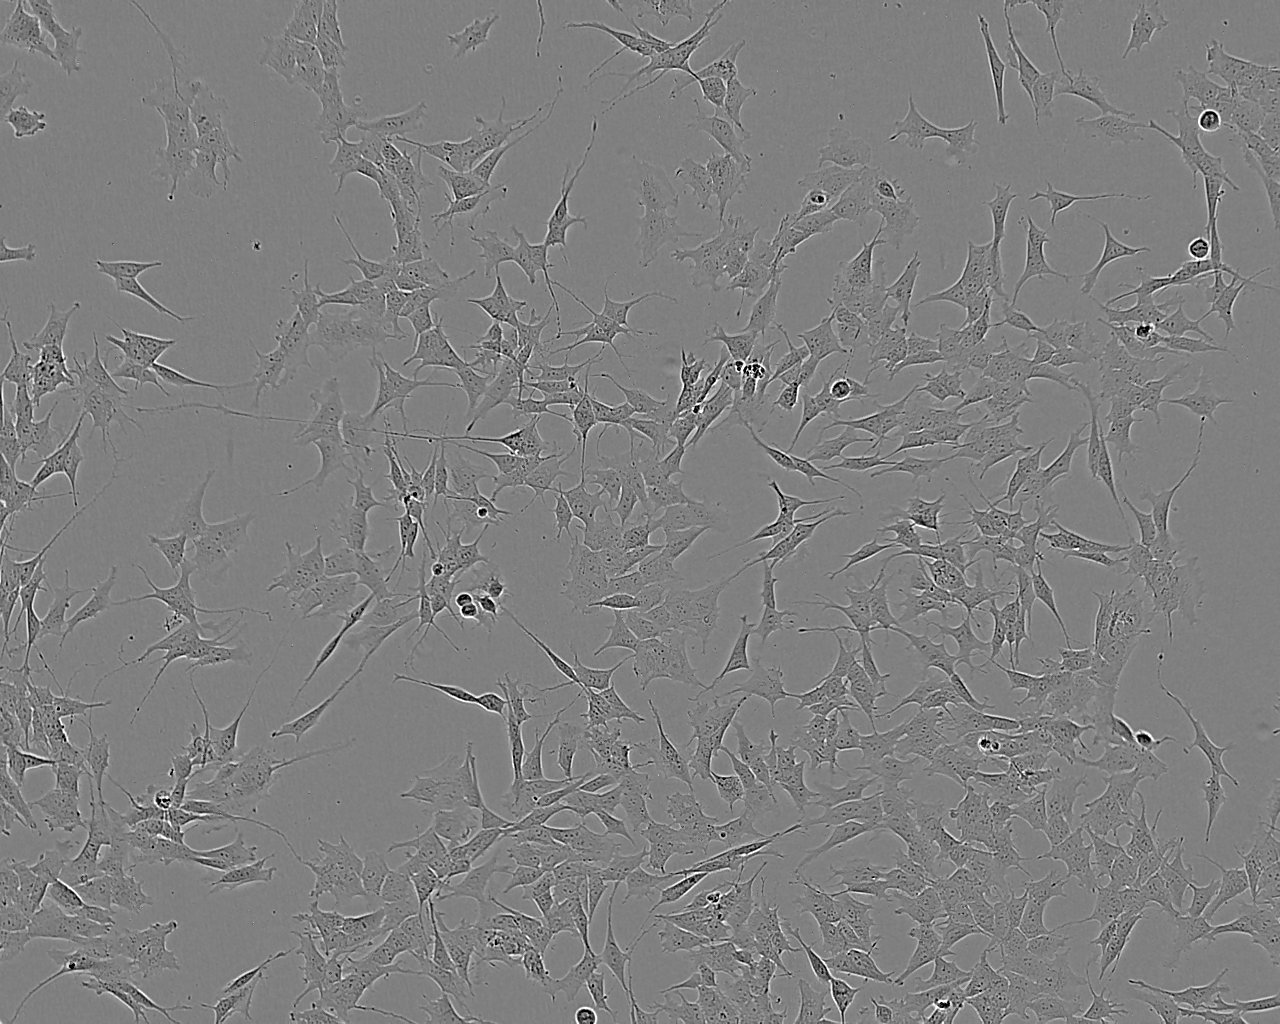 Huh-7 epithelioid cells人肝癌细胞系,Huh-7 epithelioid cells